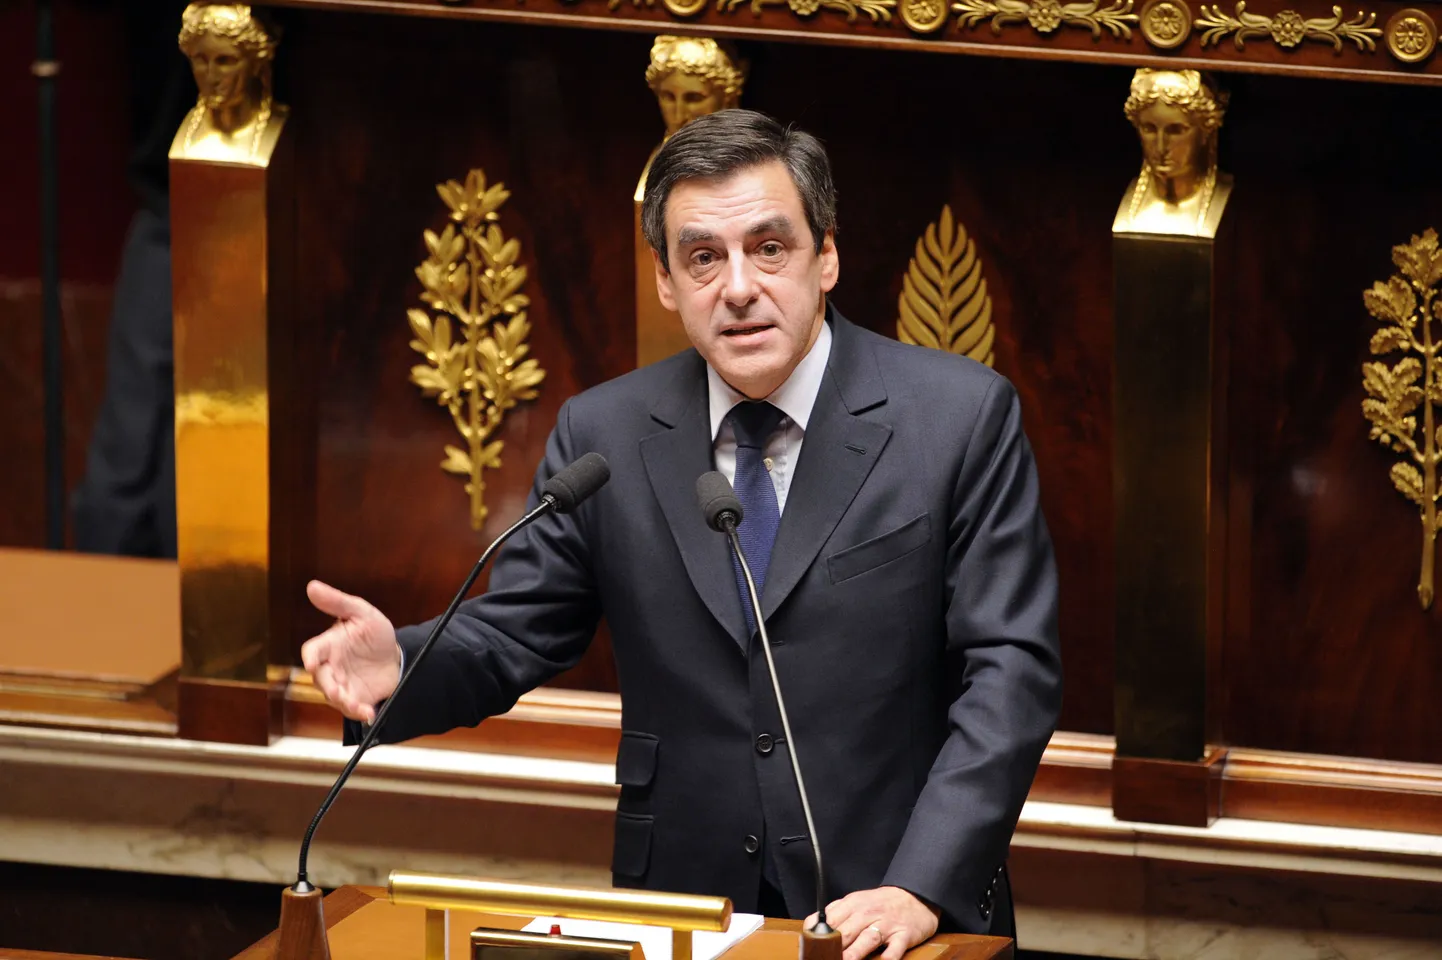 French Prime minister Francois Fillon delivers a speech, on March 17, 2009 at the French National Assembly in Paris, prior to the vote by the French parliament on president Nicolas Sarkozy's decision to bring France back into Nato's military command, more than four decades after it pulled out. Widely viewed as one of Sarkozy's most important foreign policy changes, the move has drawn fire from nationalists and some in his right-wing party who see it as a shift towards a more US-friendly stance. AFP PHOTO BERTRAND GUAY